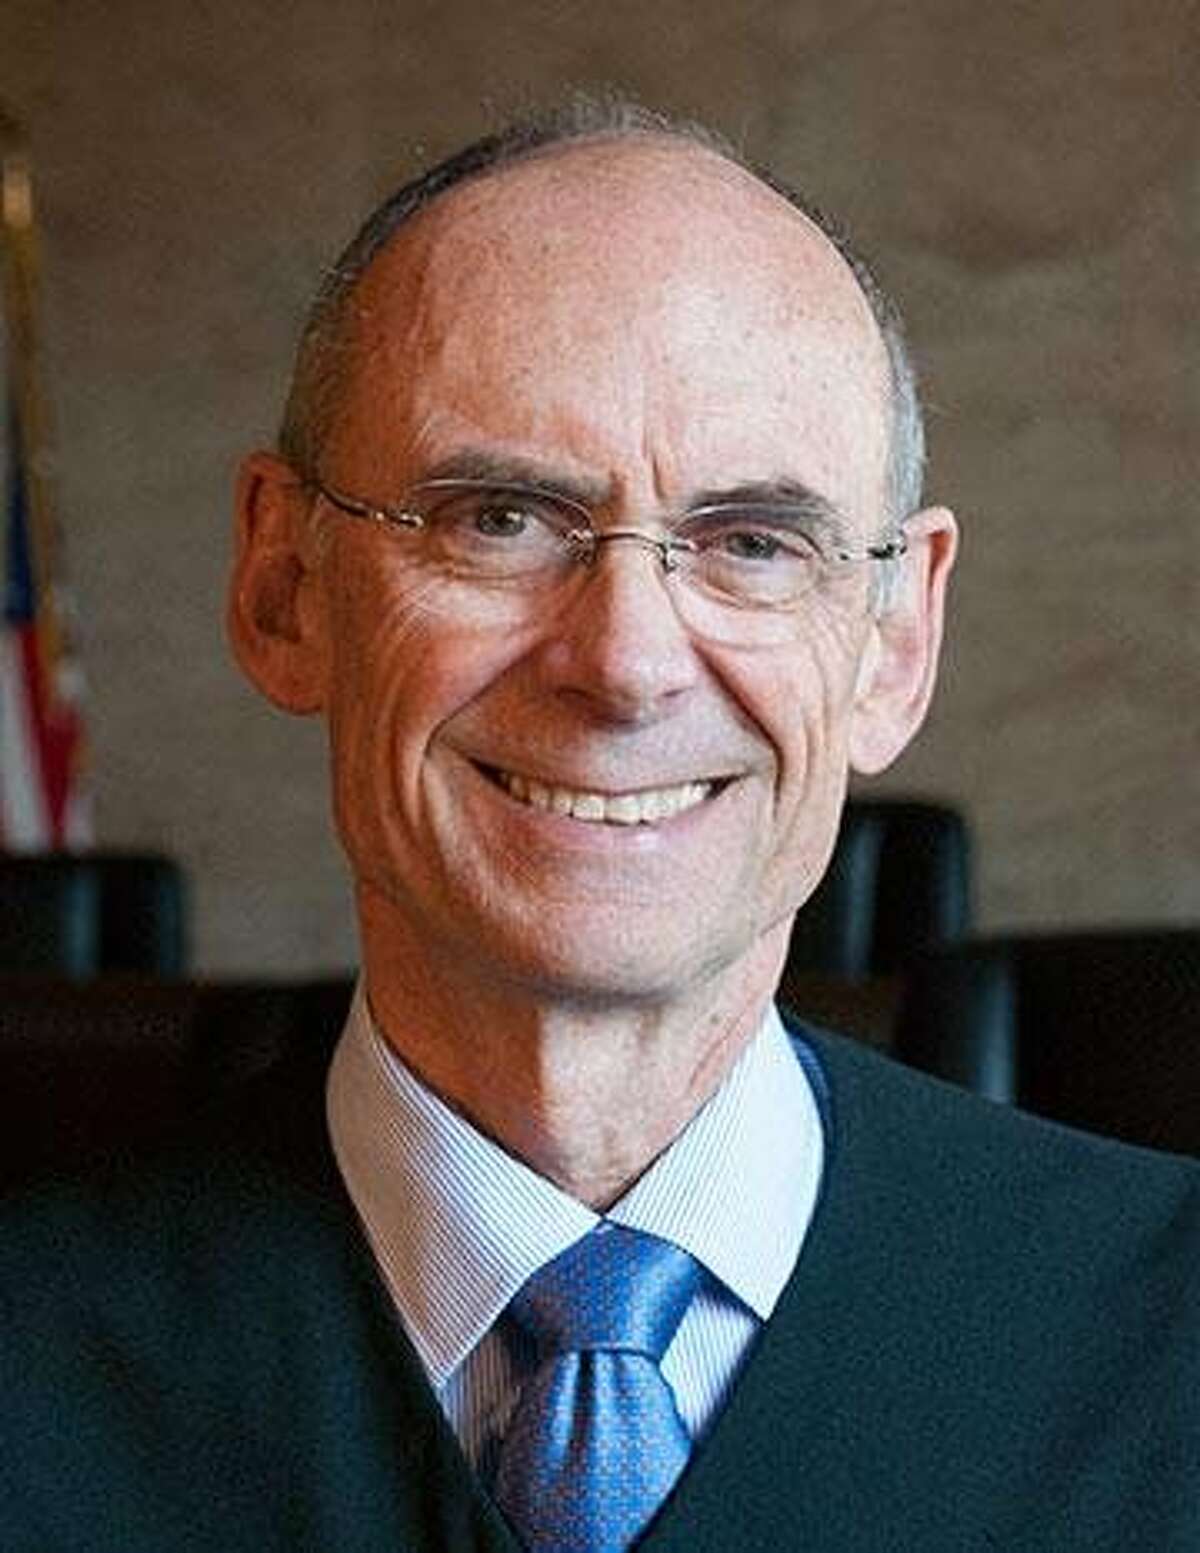 Judge Raymond Fisher of the Ninth U.S. Circuit Court of Appeals, died Feb. 29, 2020 at age 80.